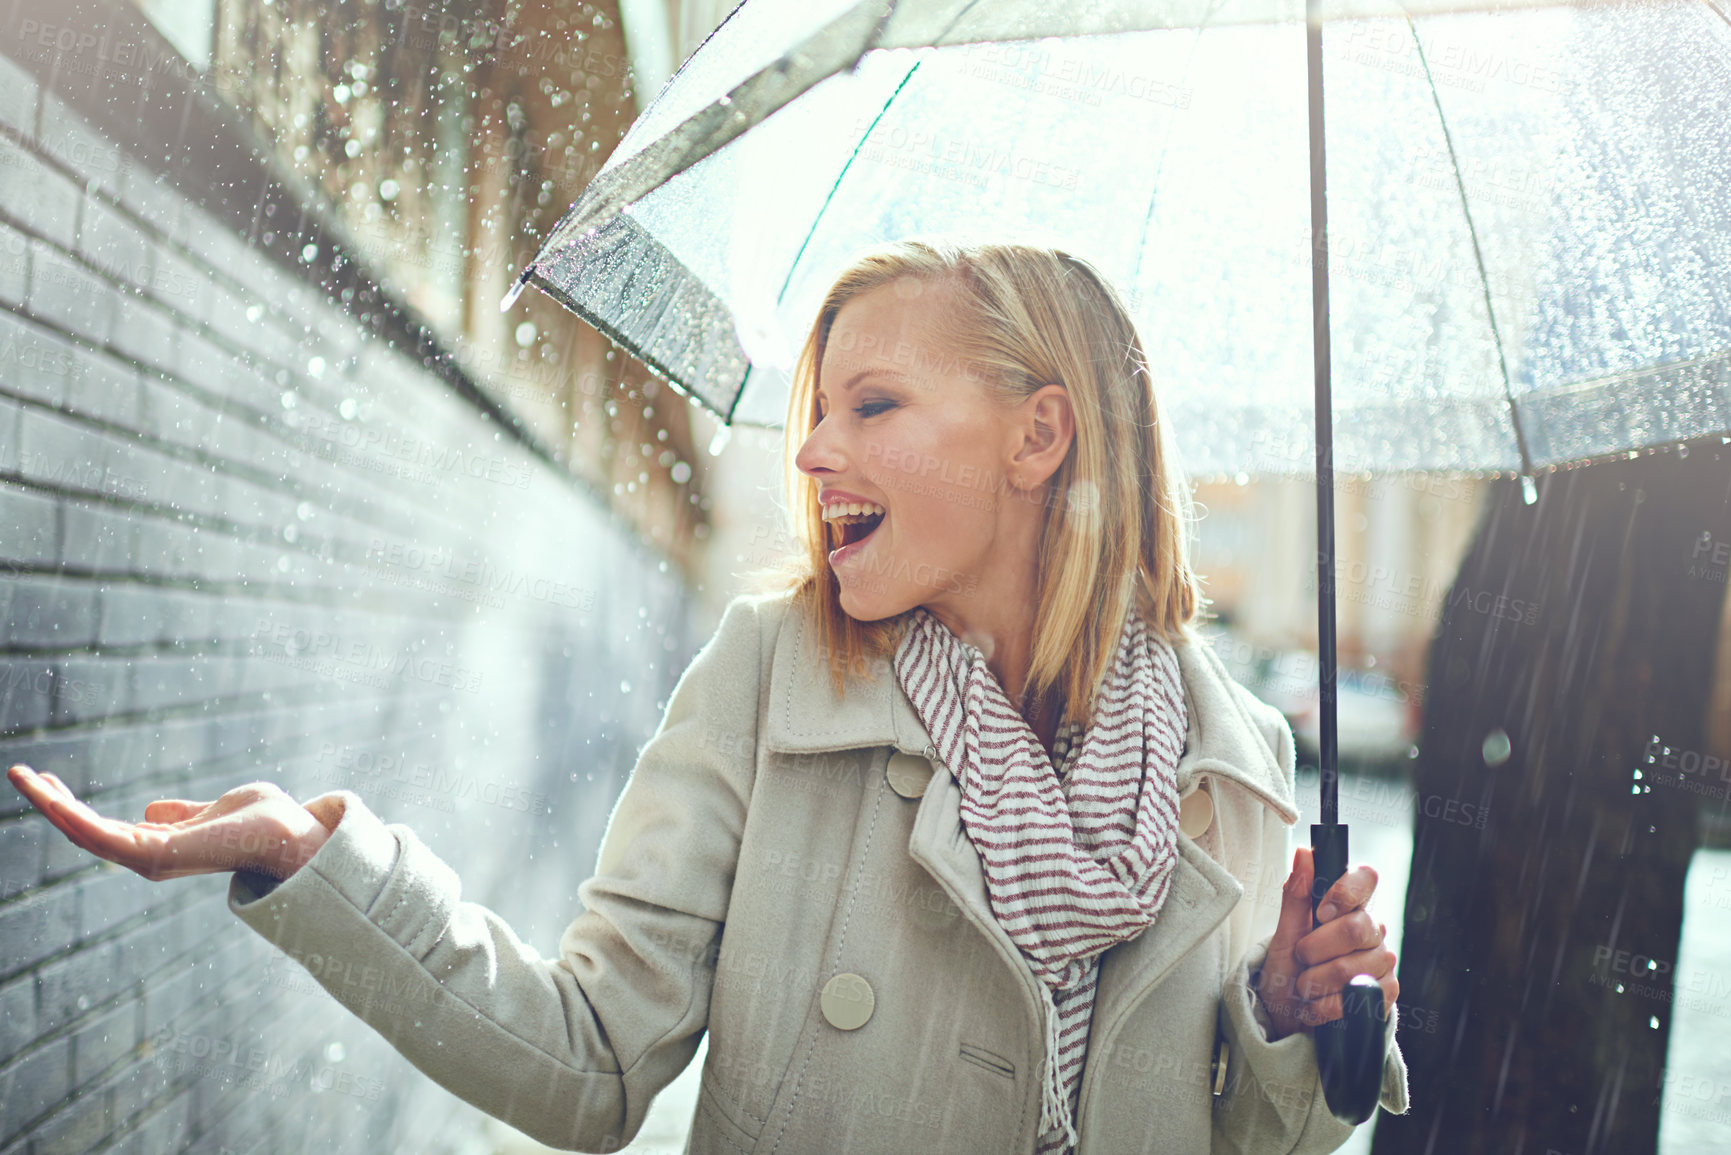 Buy stock photo Smile, happy woman and rain feeling water in the city with umbrella, freedom and happiness. Winter weather, raining and urban street with a young female person on a sidewalk and vacation outdoor